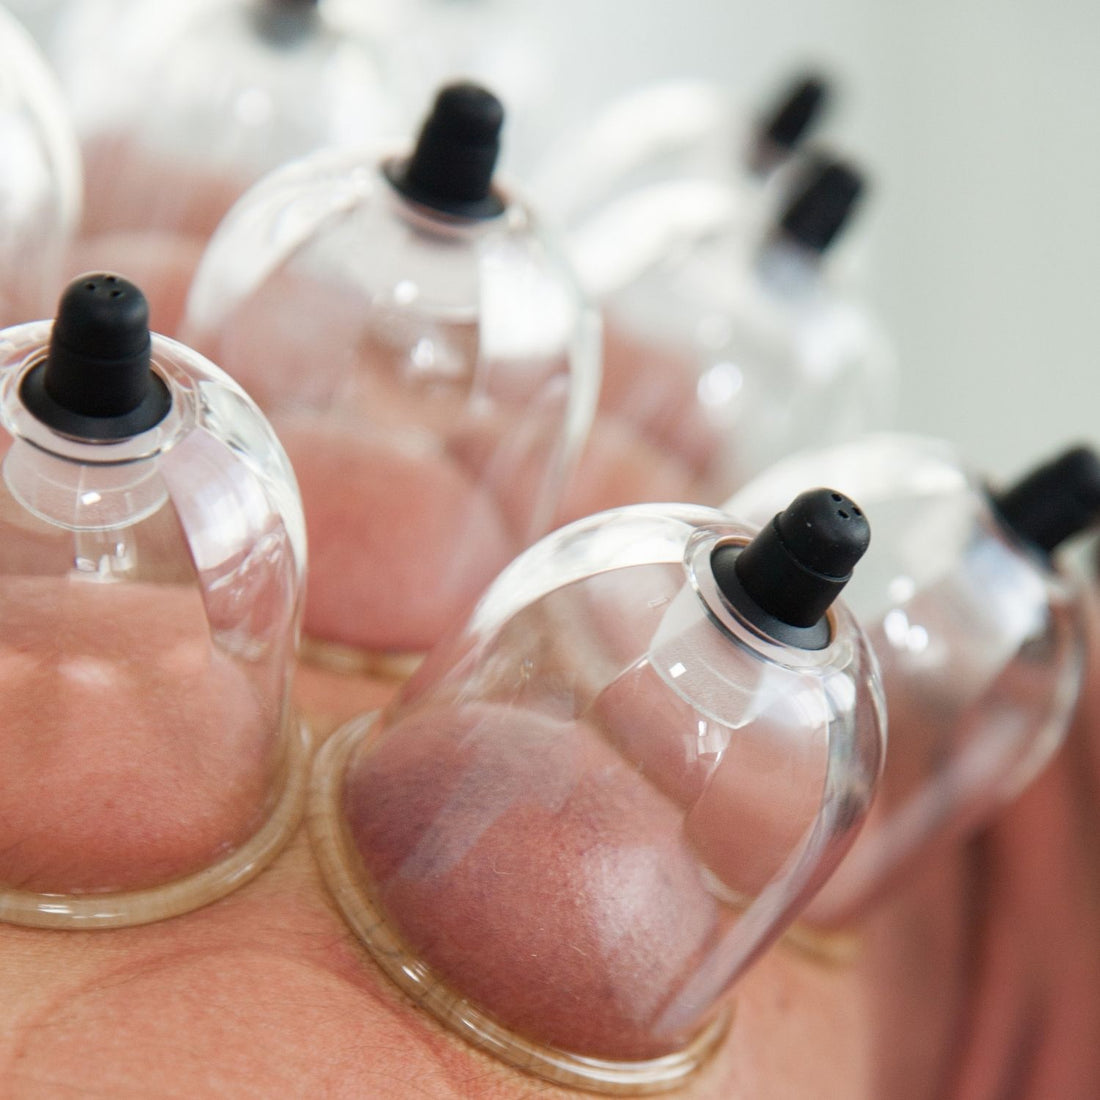 Sports cupping: Why do Athletes Use Cupping Therapy?